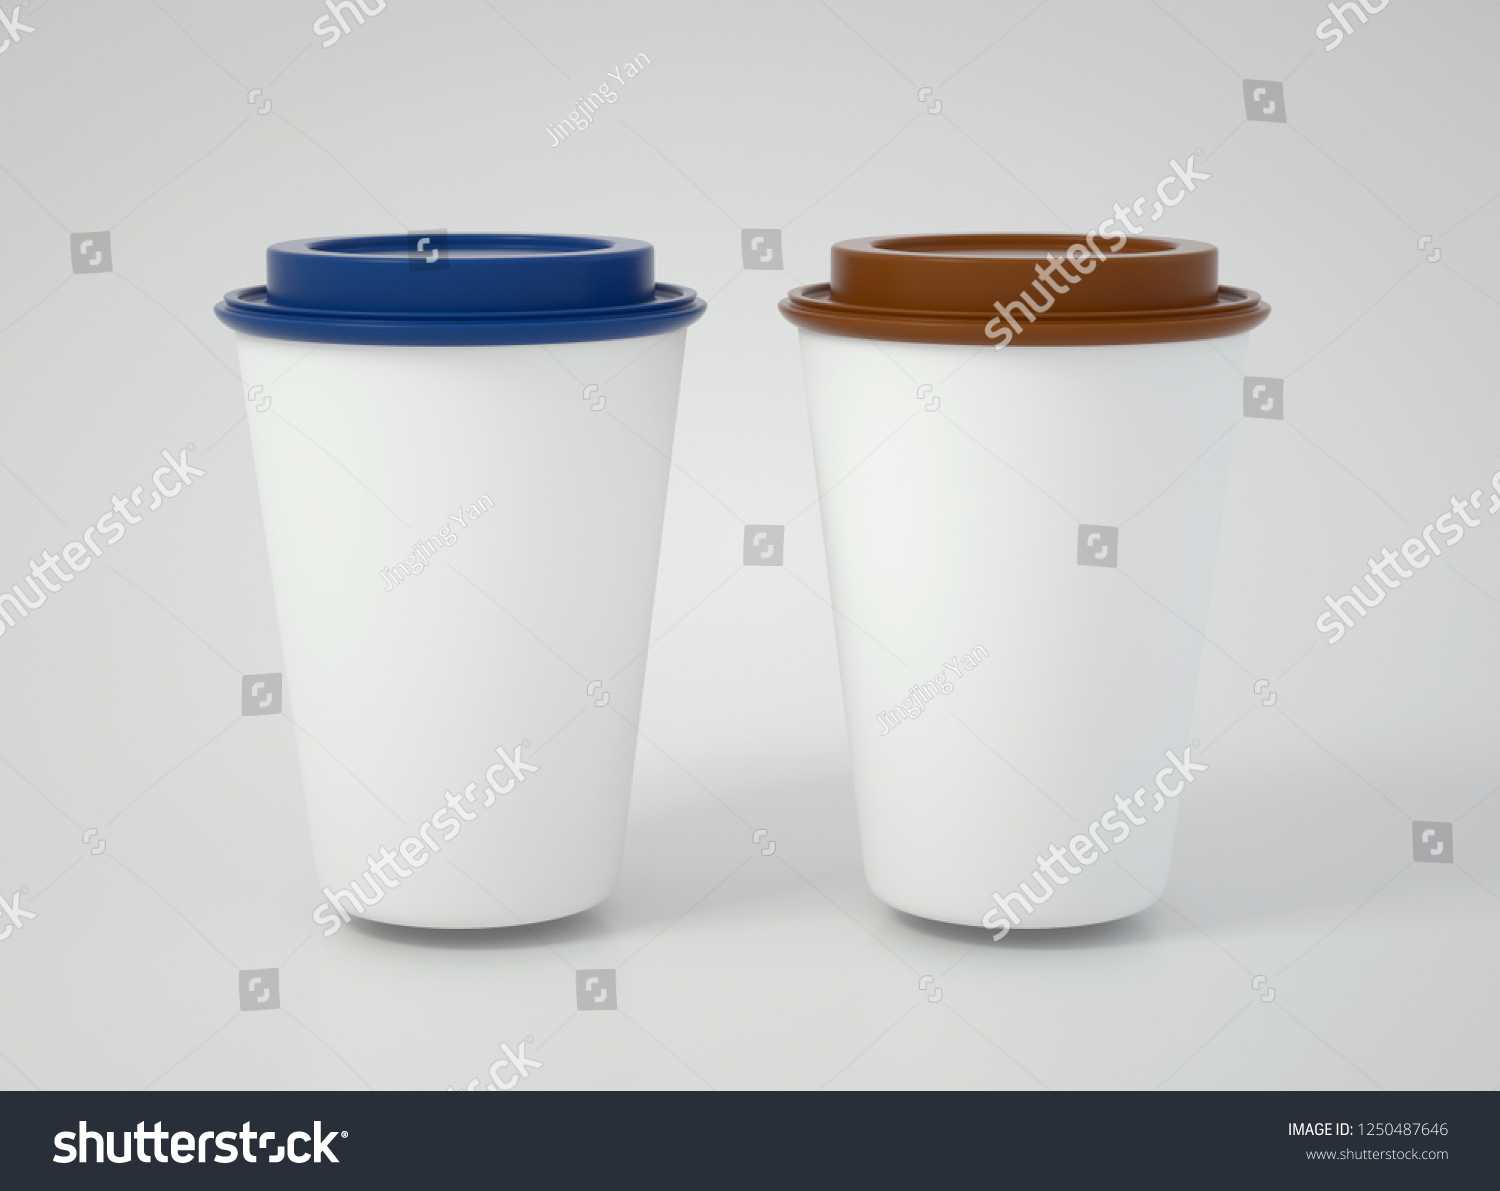 Cafe+Starbucks Stock Illustrations, Images & Vectors Within Starbucks Create Your Own Tumbler Blank Template